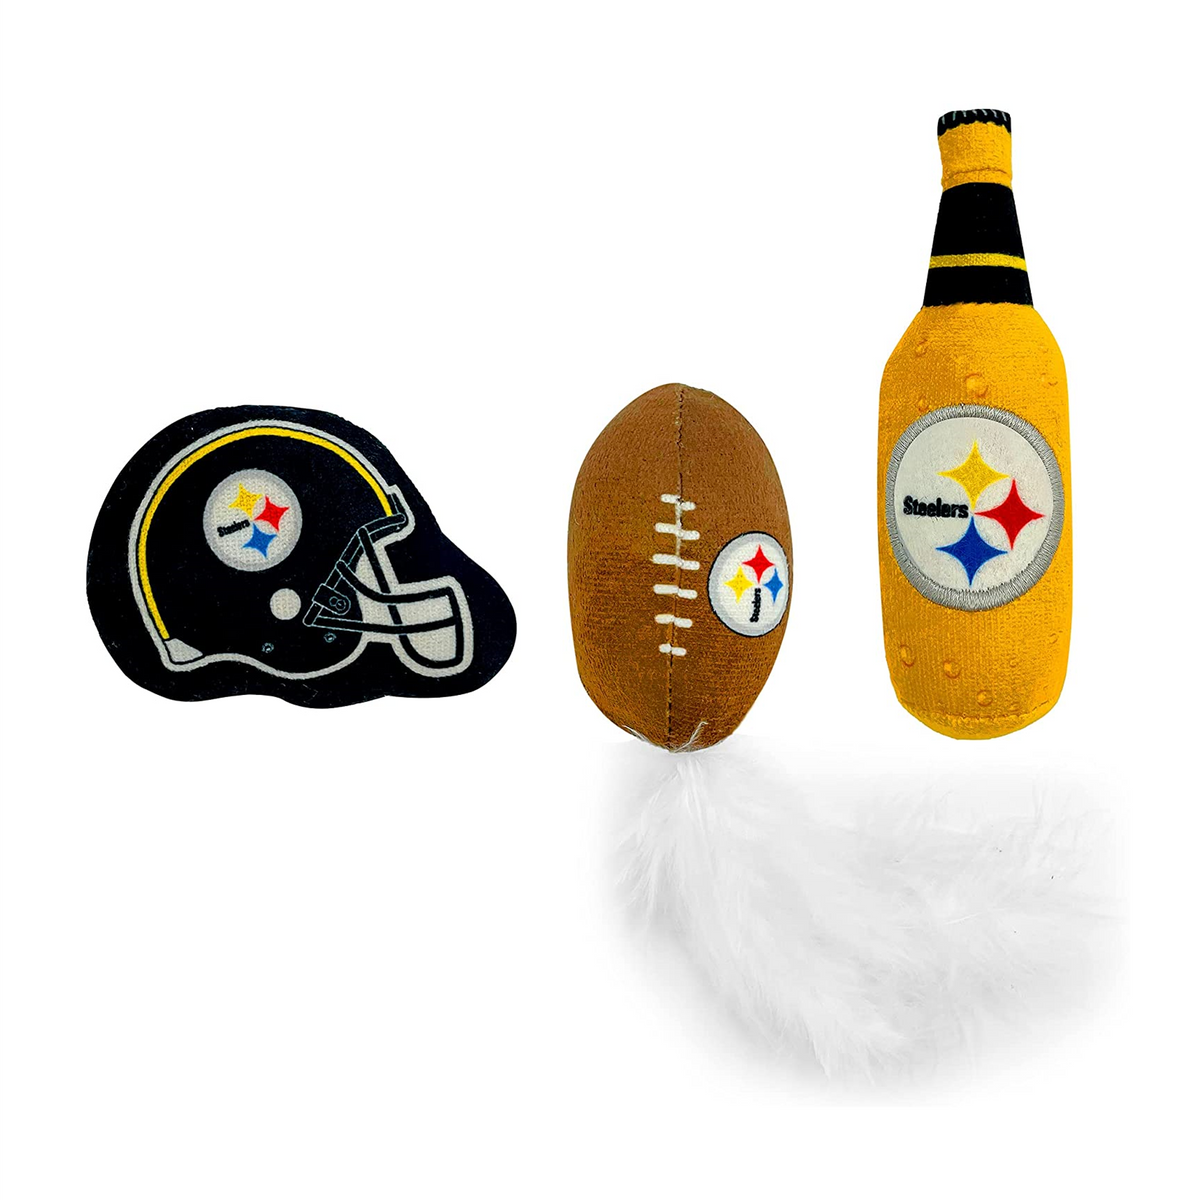 Pittsburgh Steelers 3 piece Catnip Toy Set - 3 Red Rovers